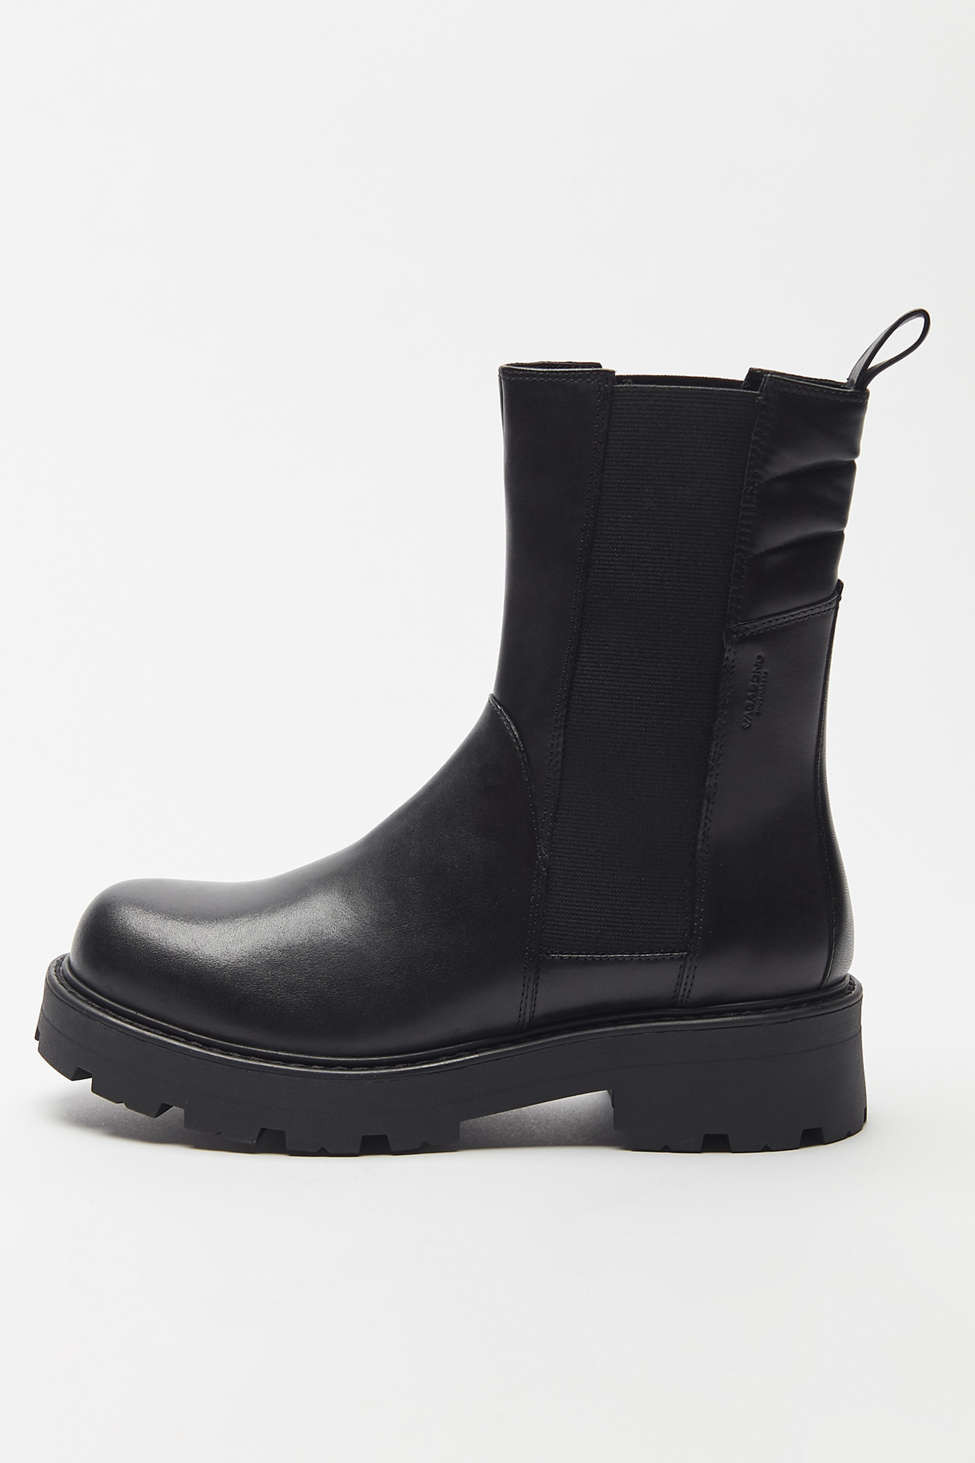 Vagabond Shoemakers Cosmo 2.0 Chelsea Boot